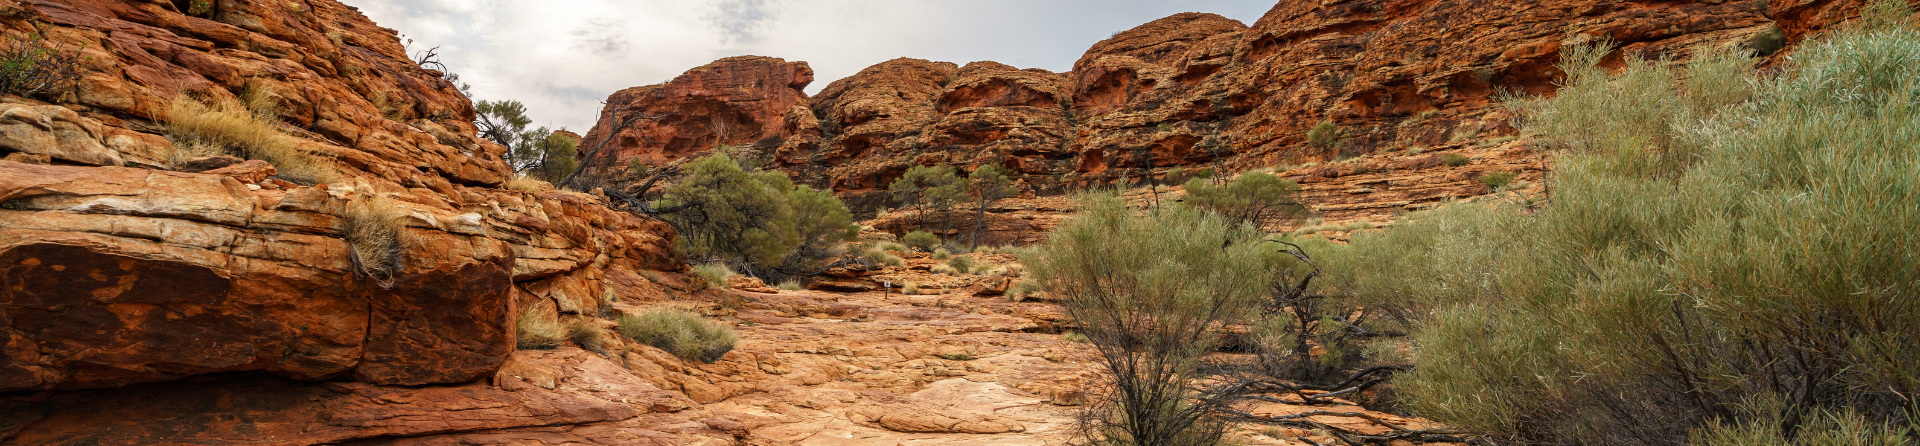 What is the history of Watarrka National Park?